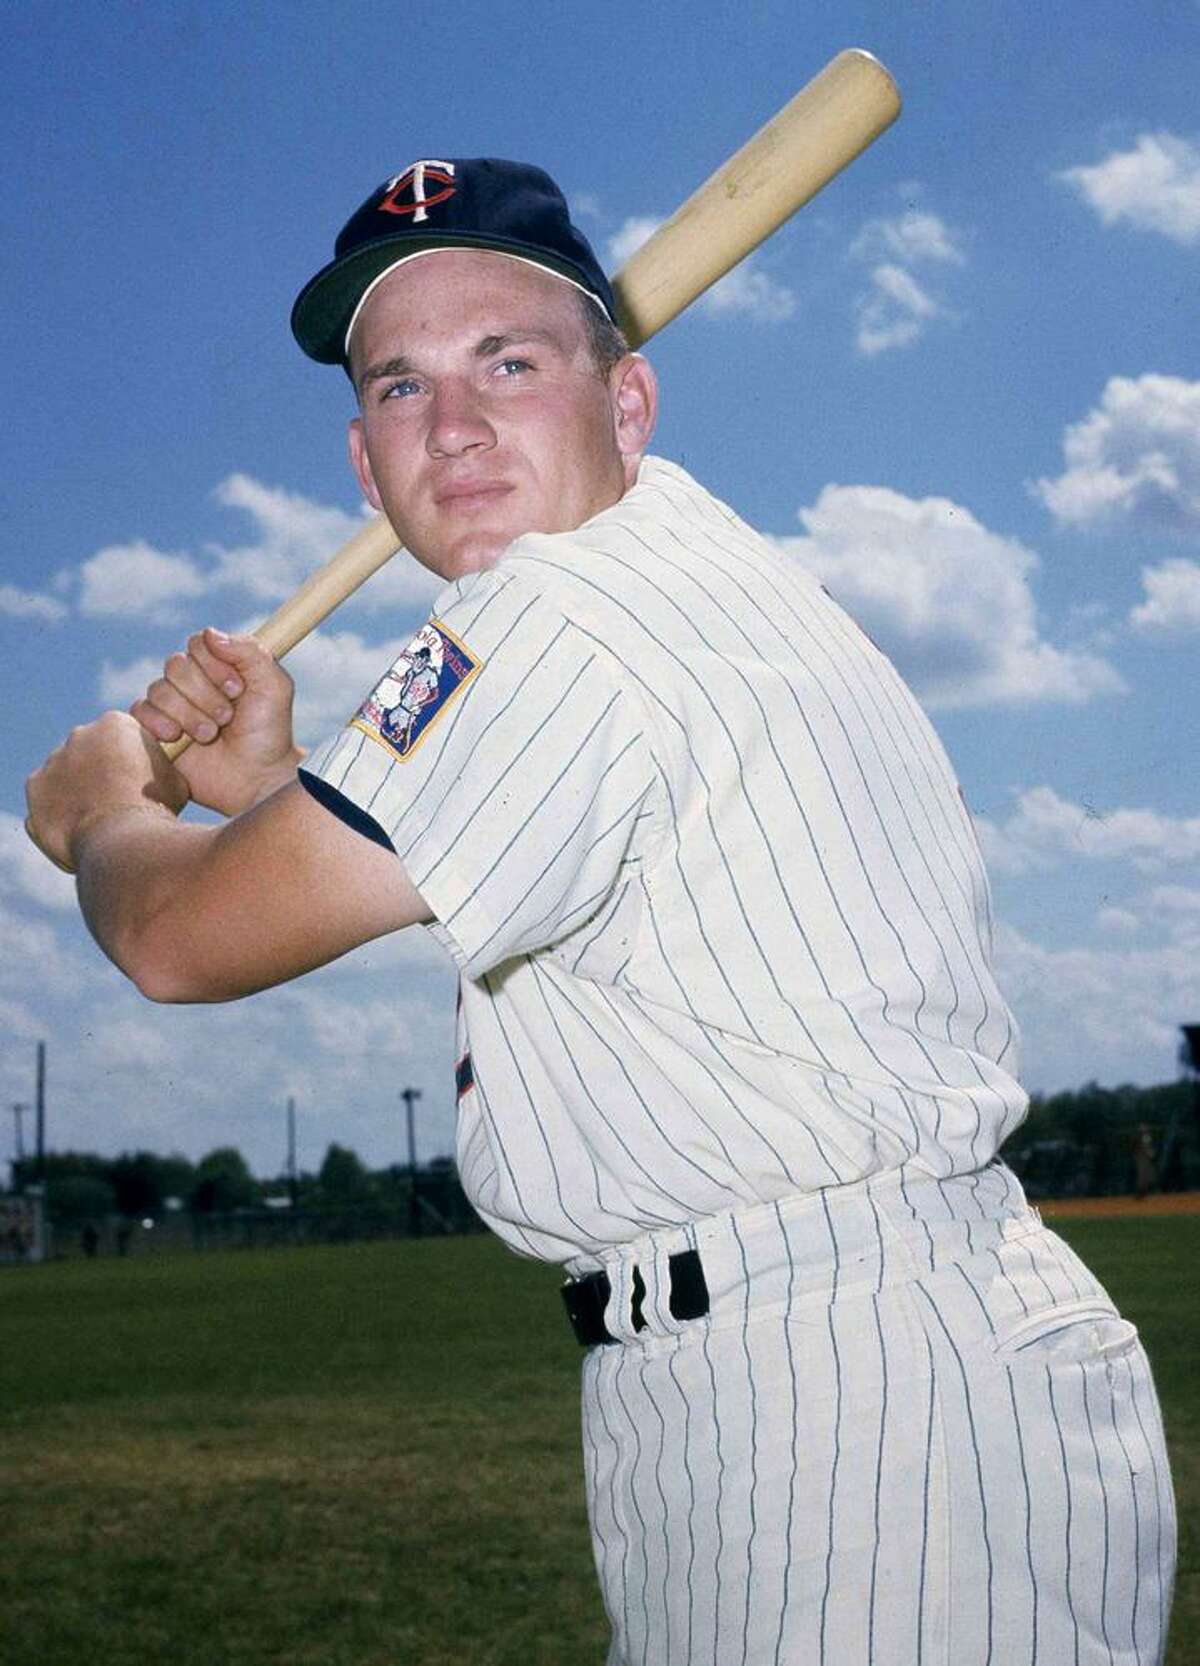 Harmon Killebrew was known for his soft side